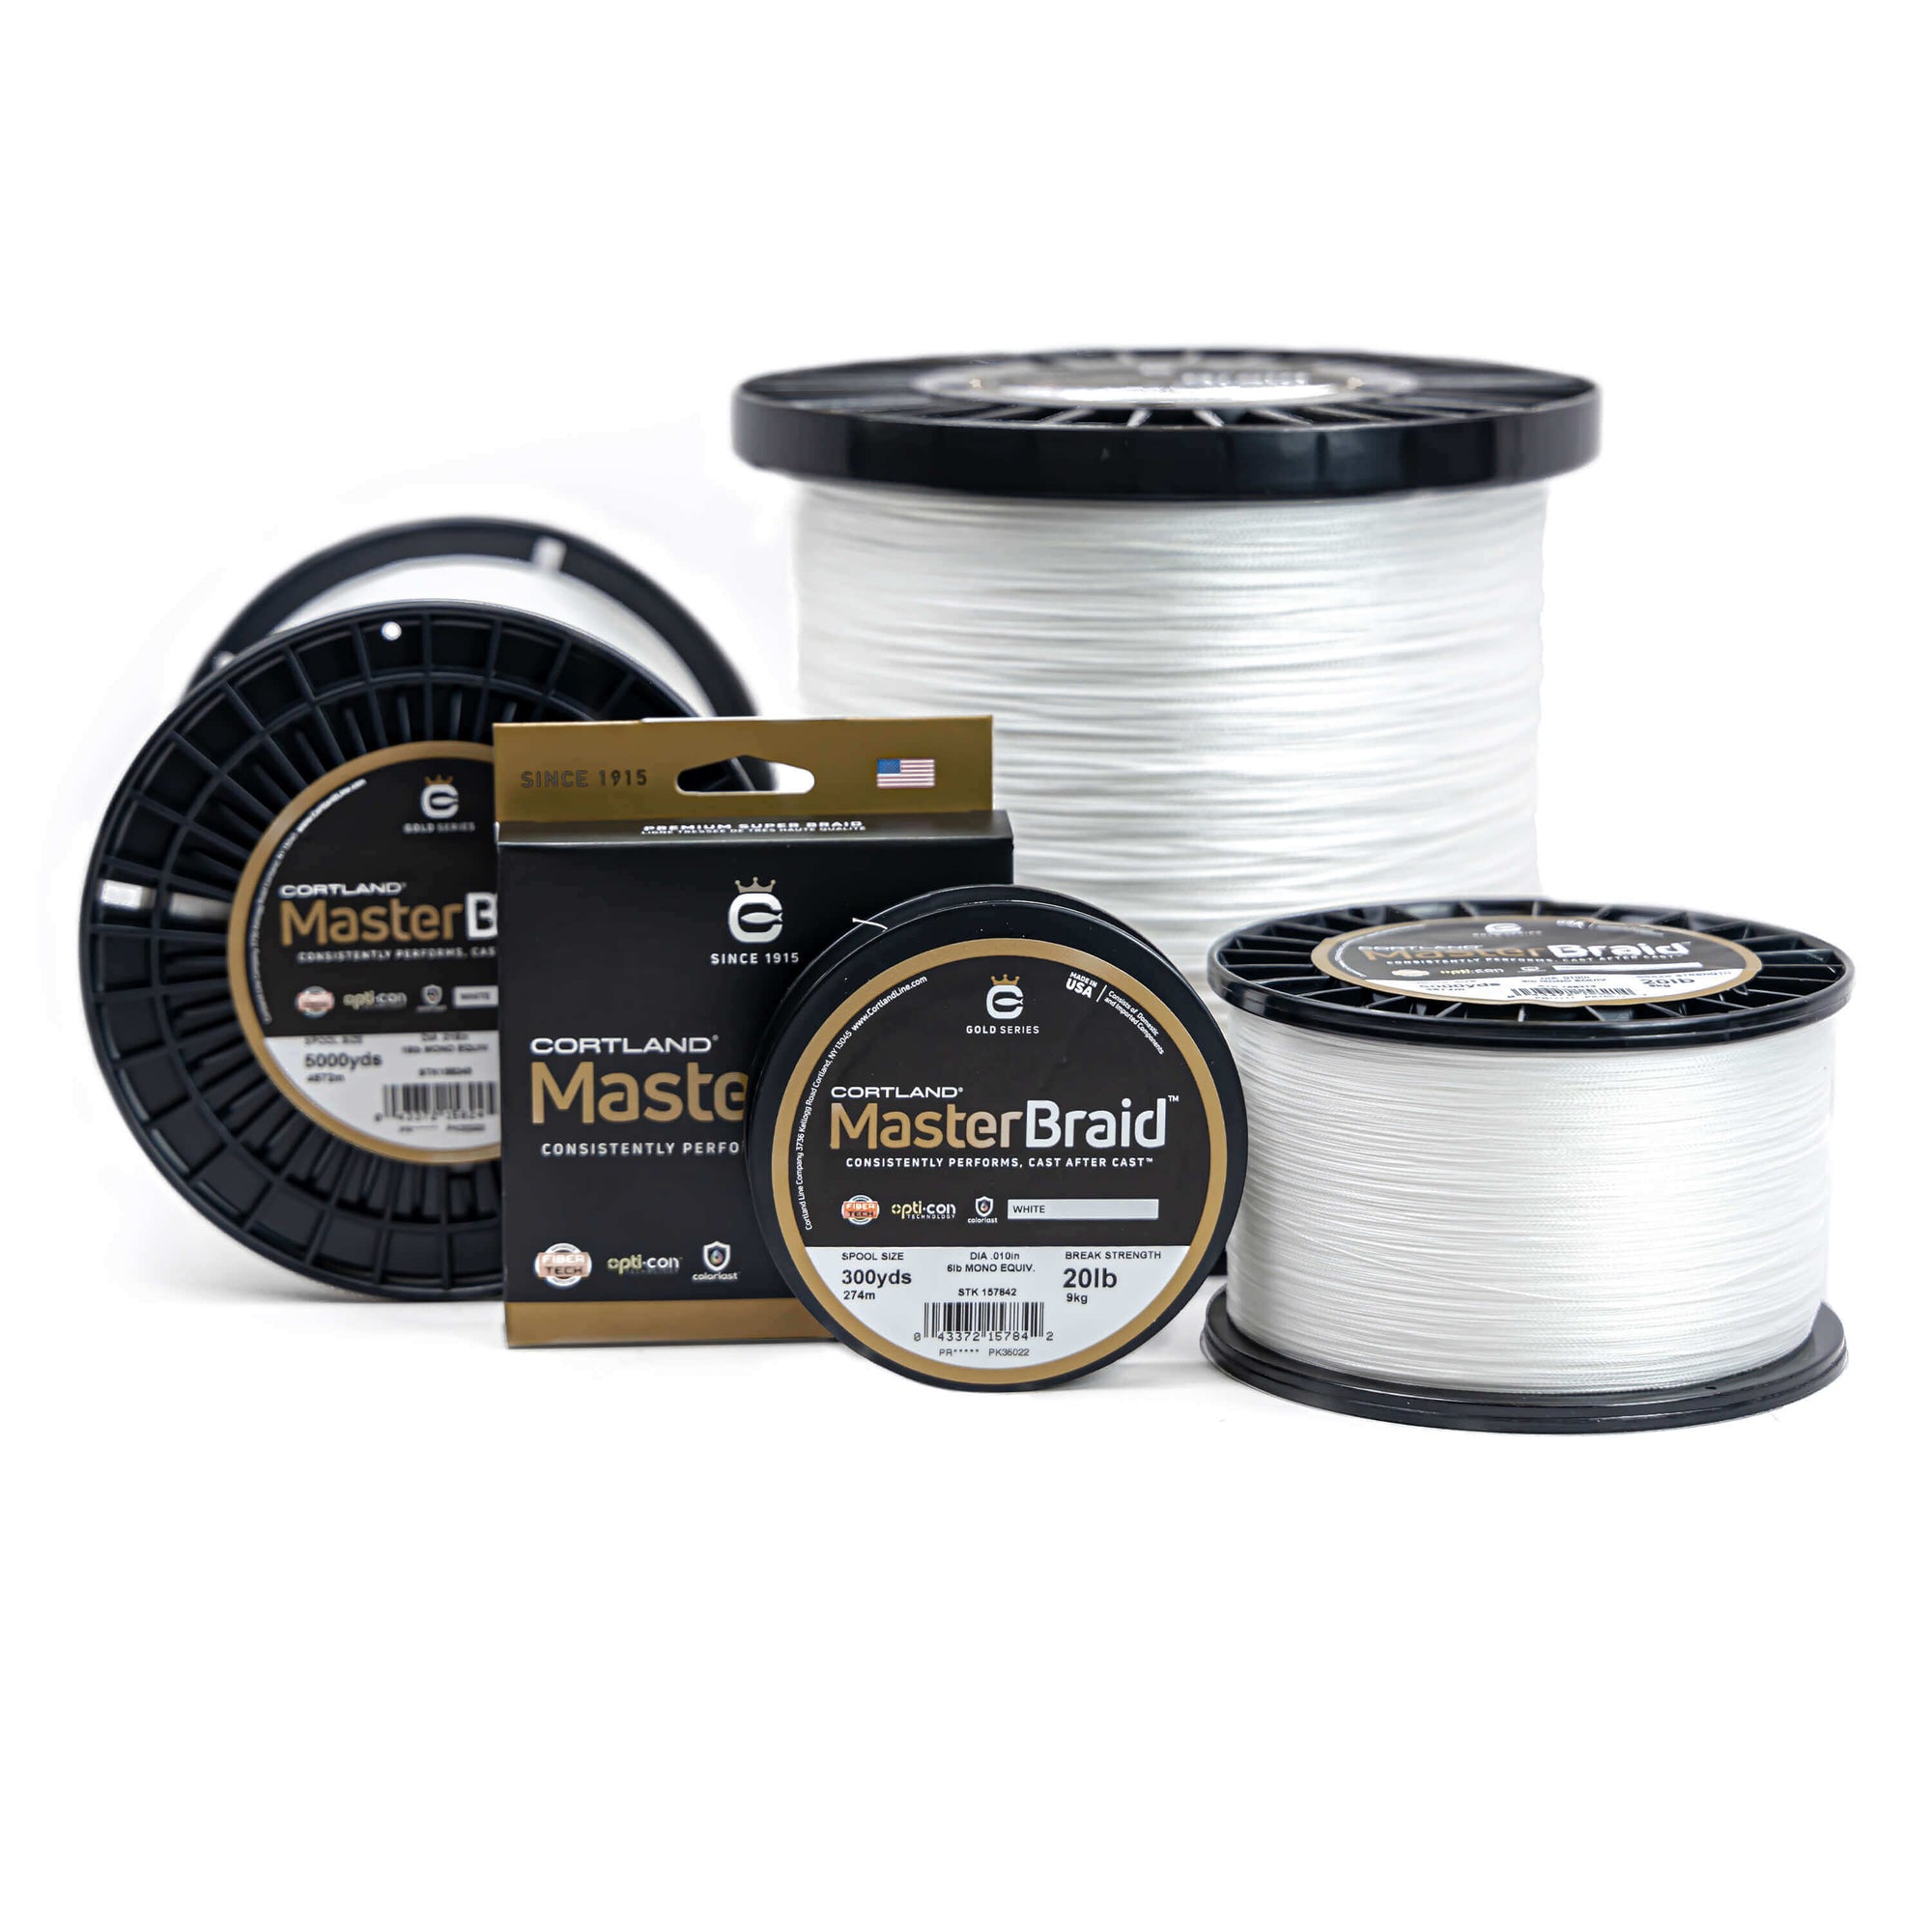 Cortland Master Braid - White fishing line. There is four spools in different sizes and one in a box.